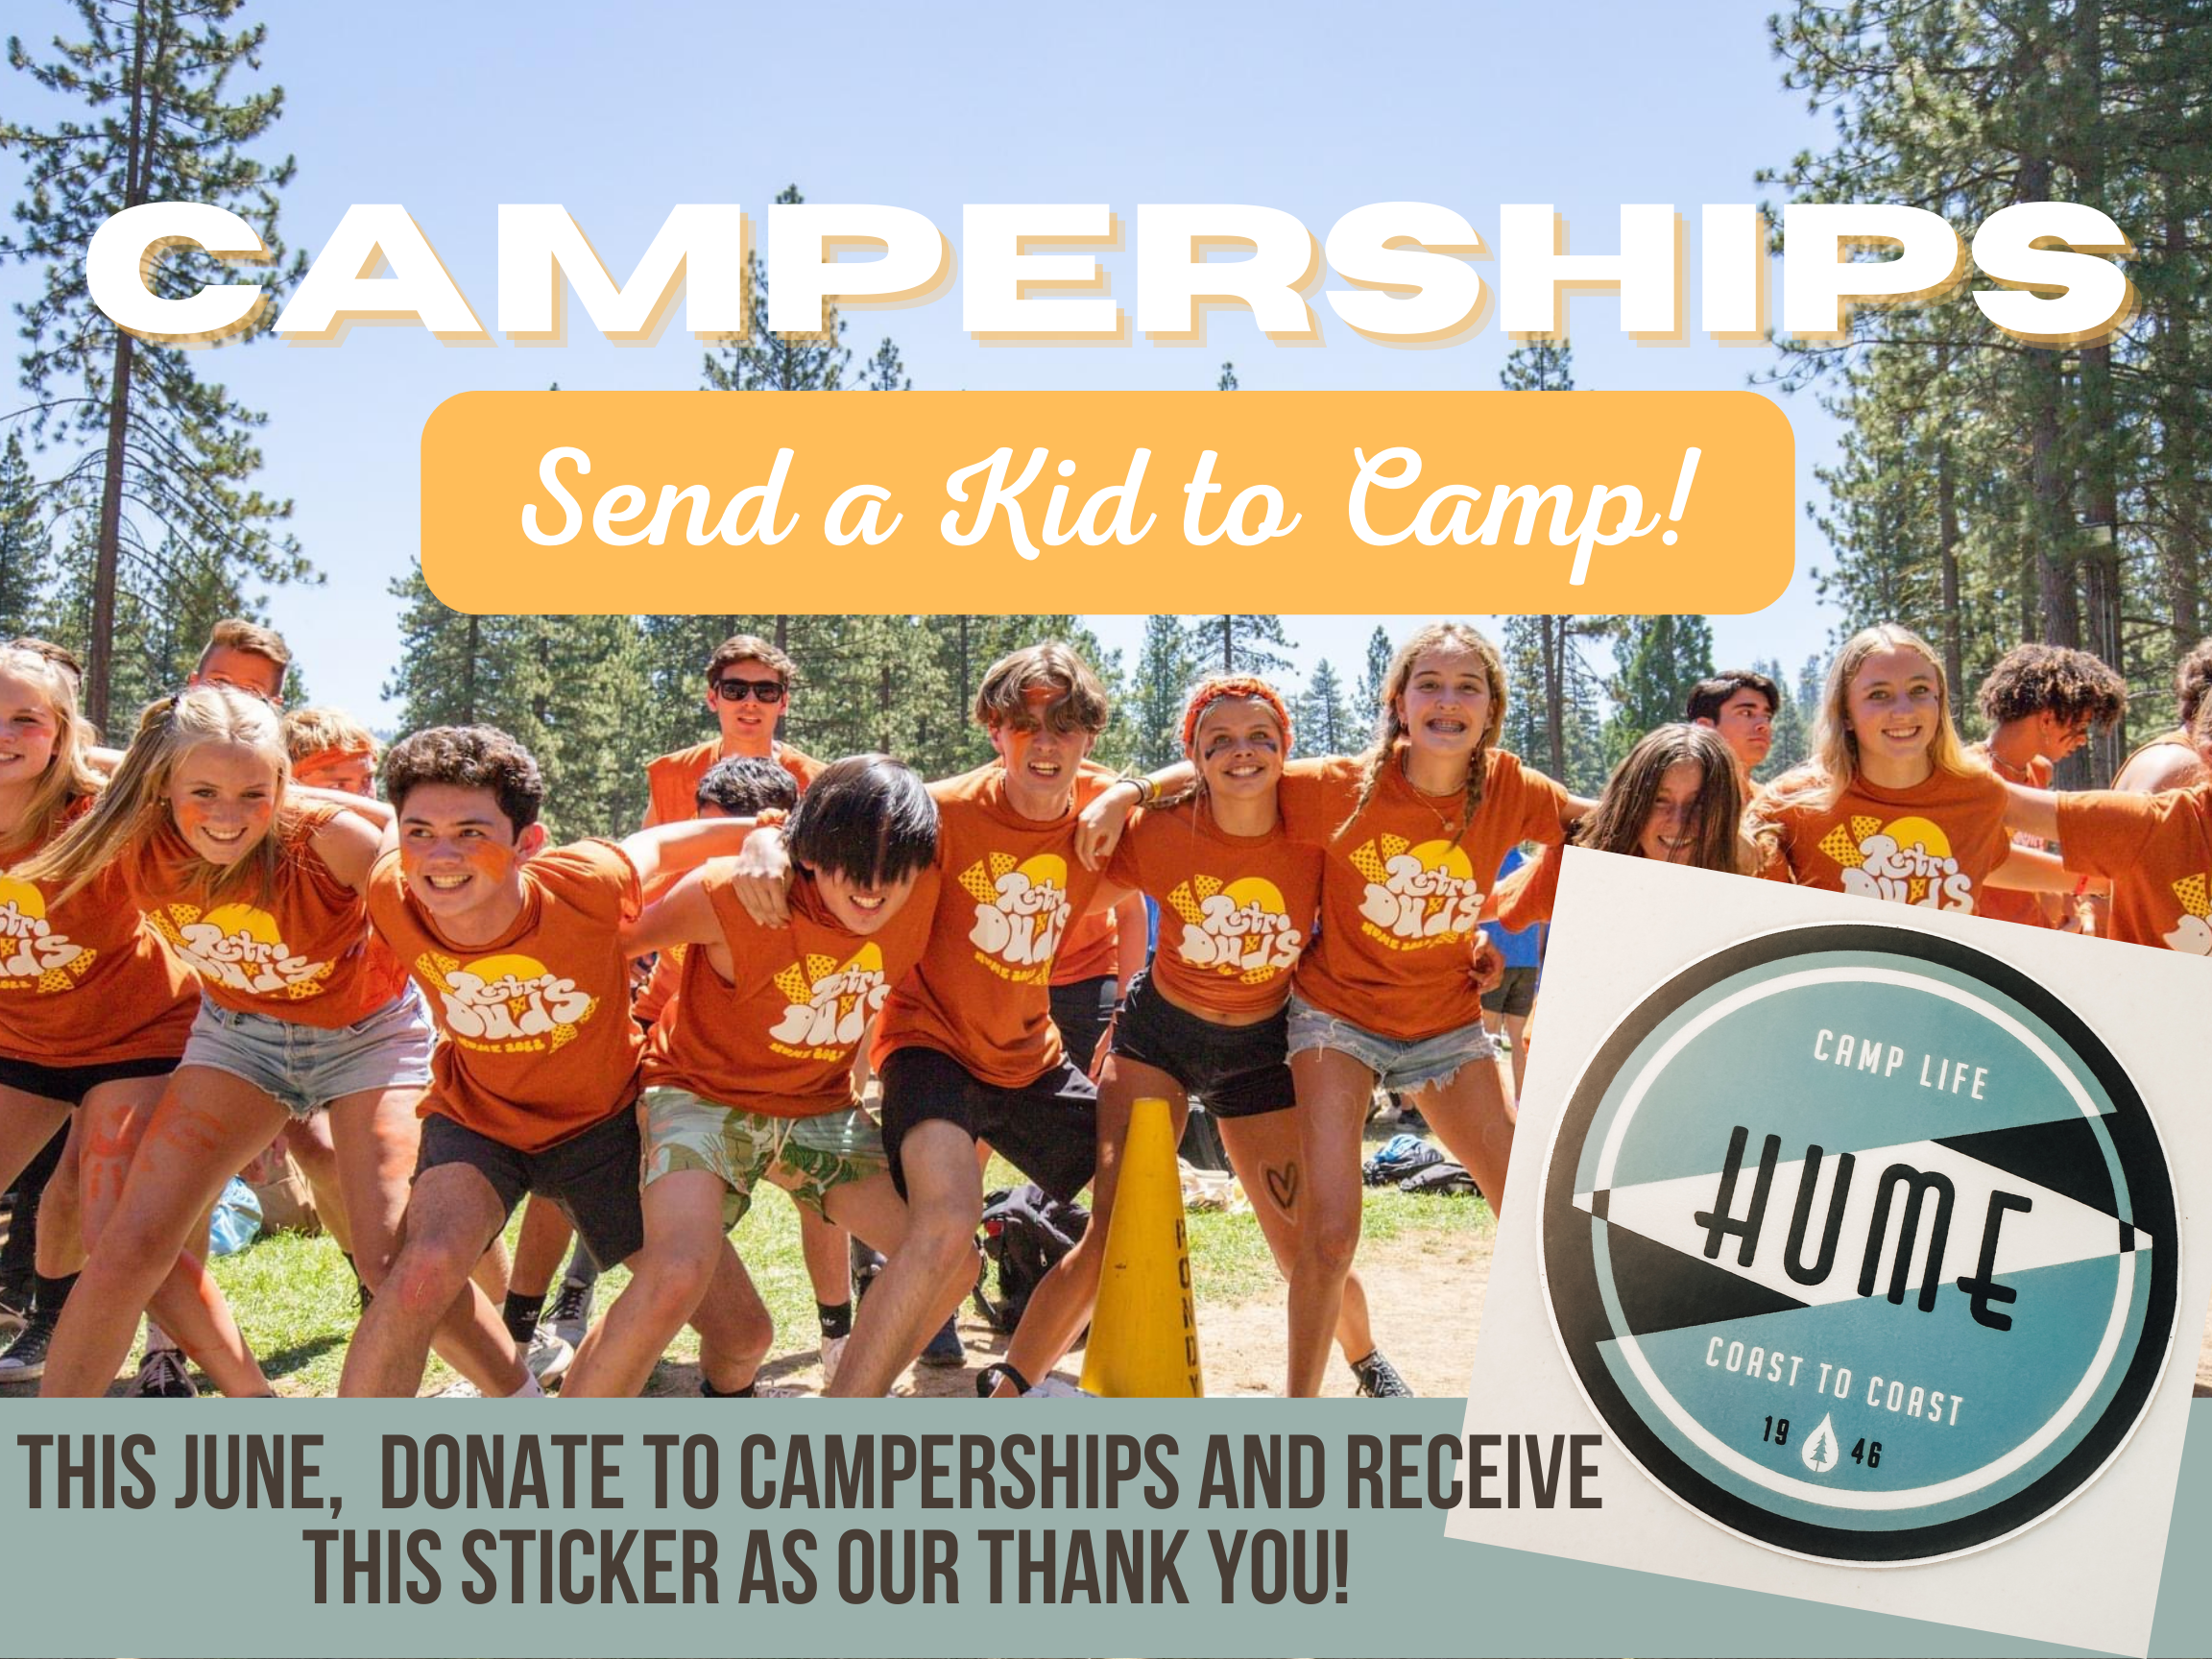 Help Send a Kid to Camp: This June, Donate to Hume  Camperships and Receive a Special Gift!